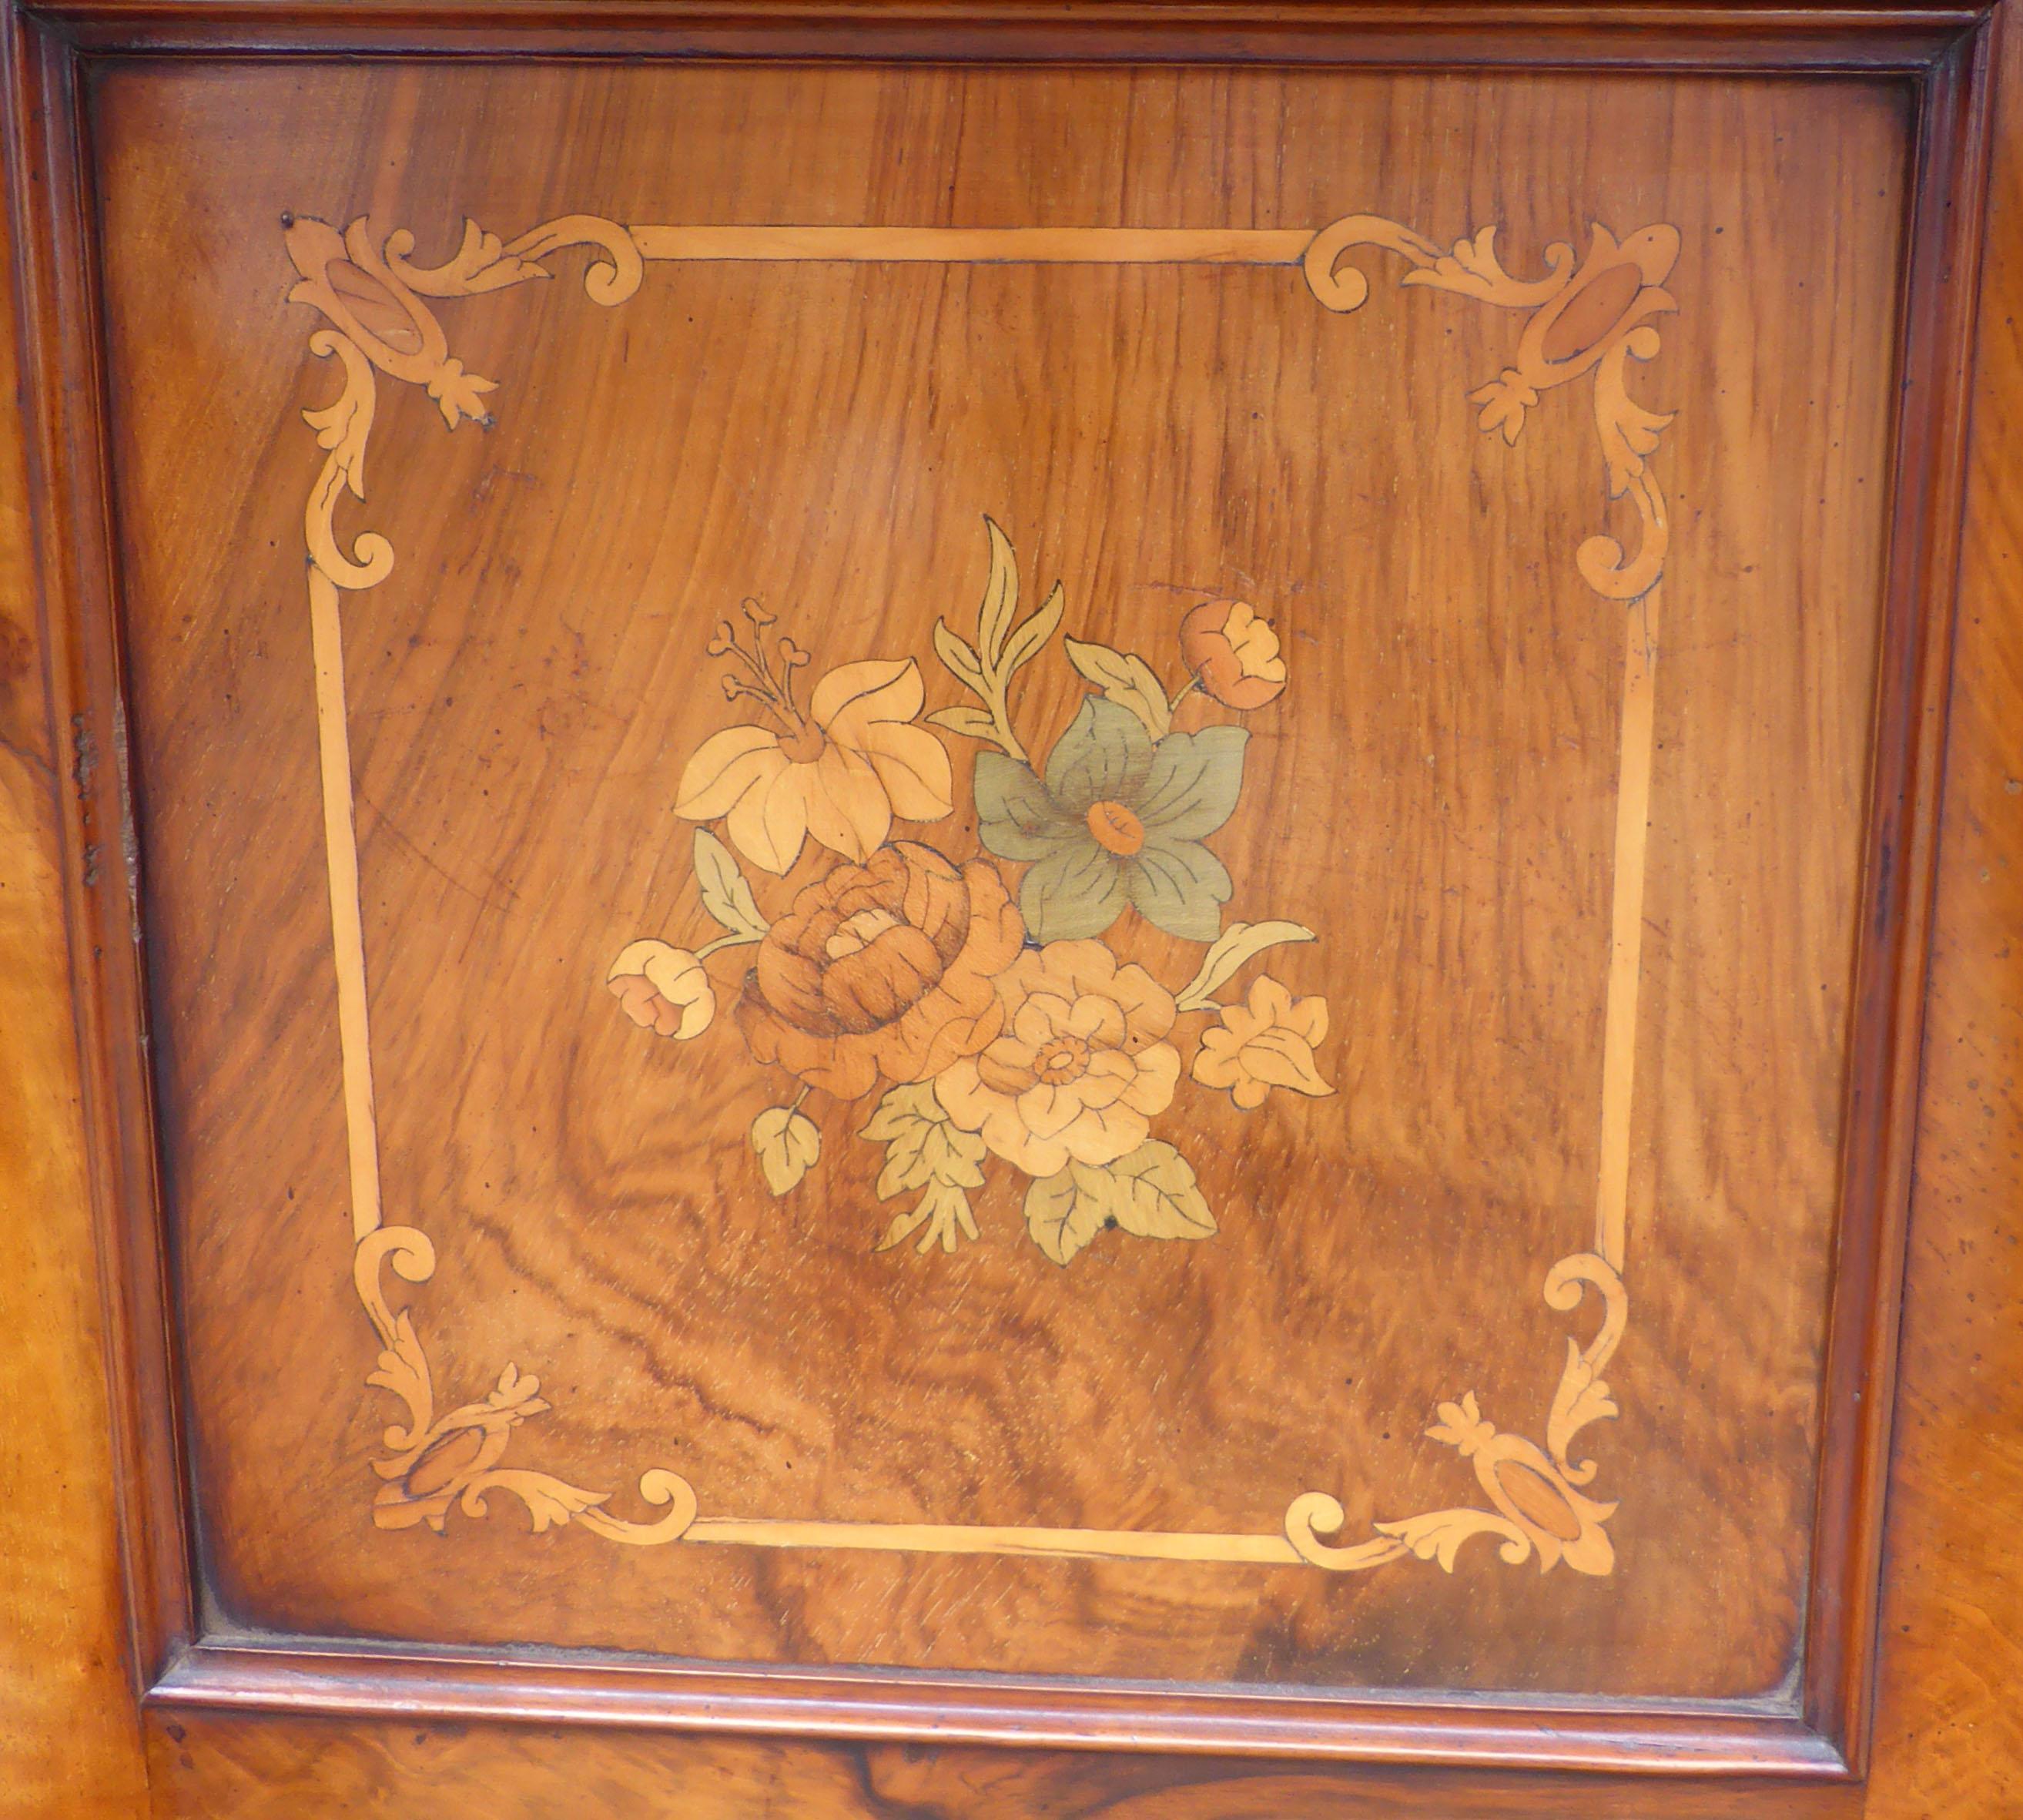 Fine marquetry walnut Davenport profusely inlaid with flowers. Early Victorian, circa 1850 with Wellington chest side lockers on the drawers. The top of the davenport has a very nice fretted wooden gallery. The rising fall has inlaid flowers